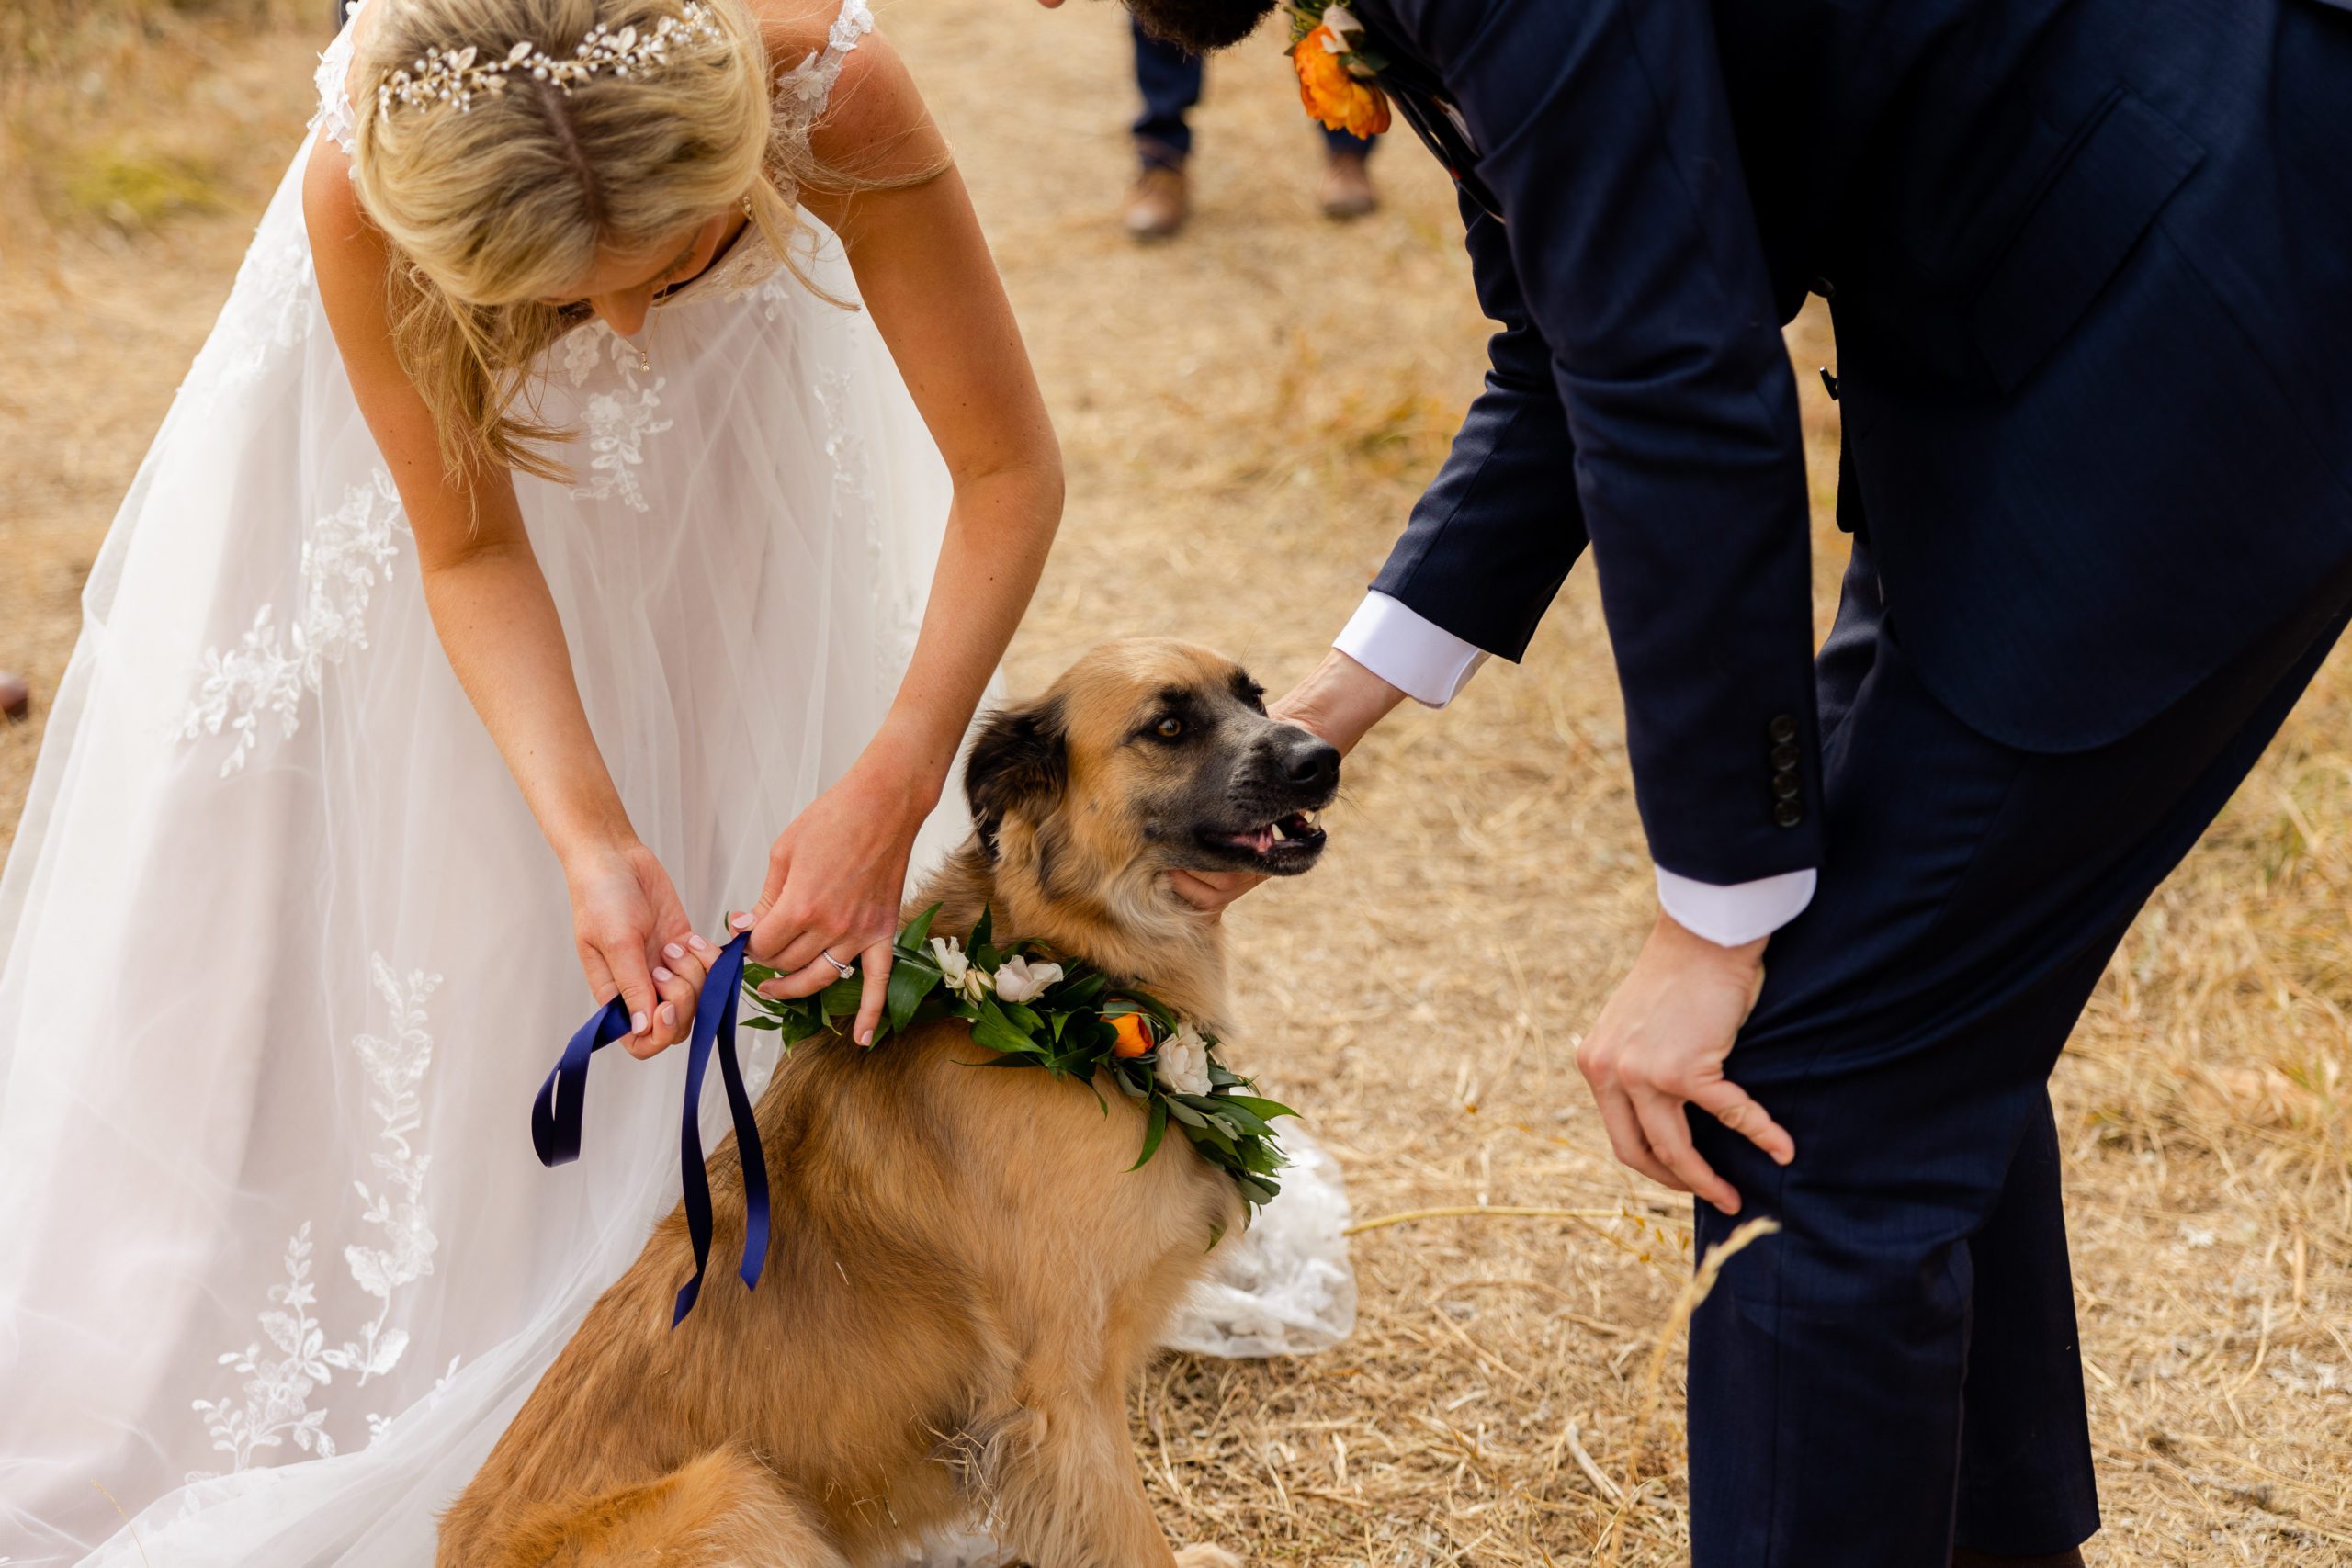 Floral wedding collar for dog, Bride and groom wedding photo with dog on Chautauqua Trail in Boulder